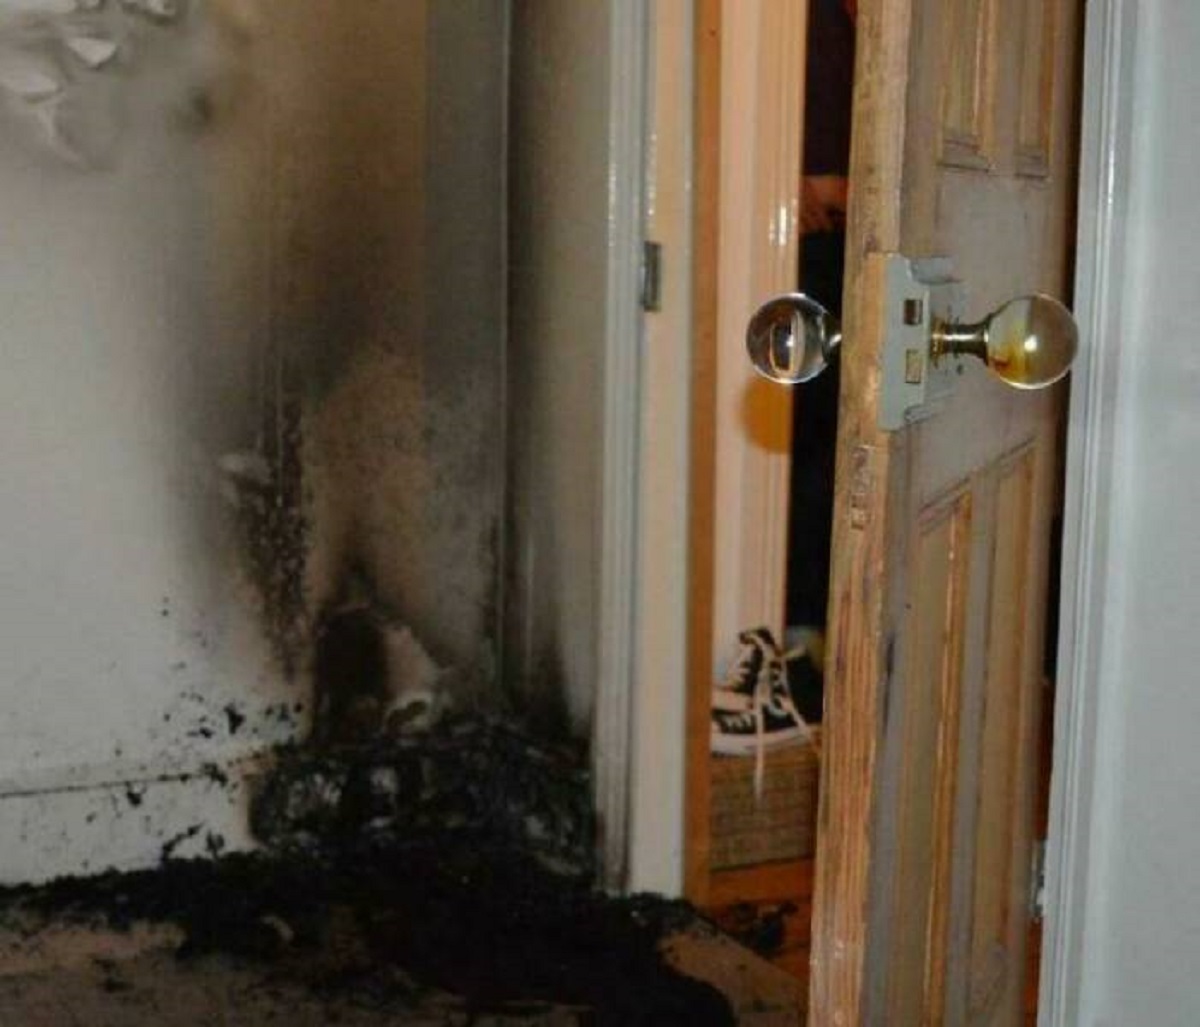 "Sunlight Through This Glass Doorknob Started A Housefire"